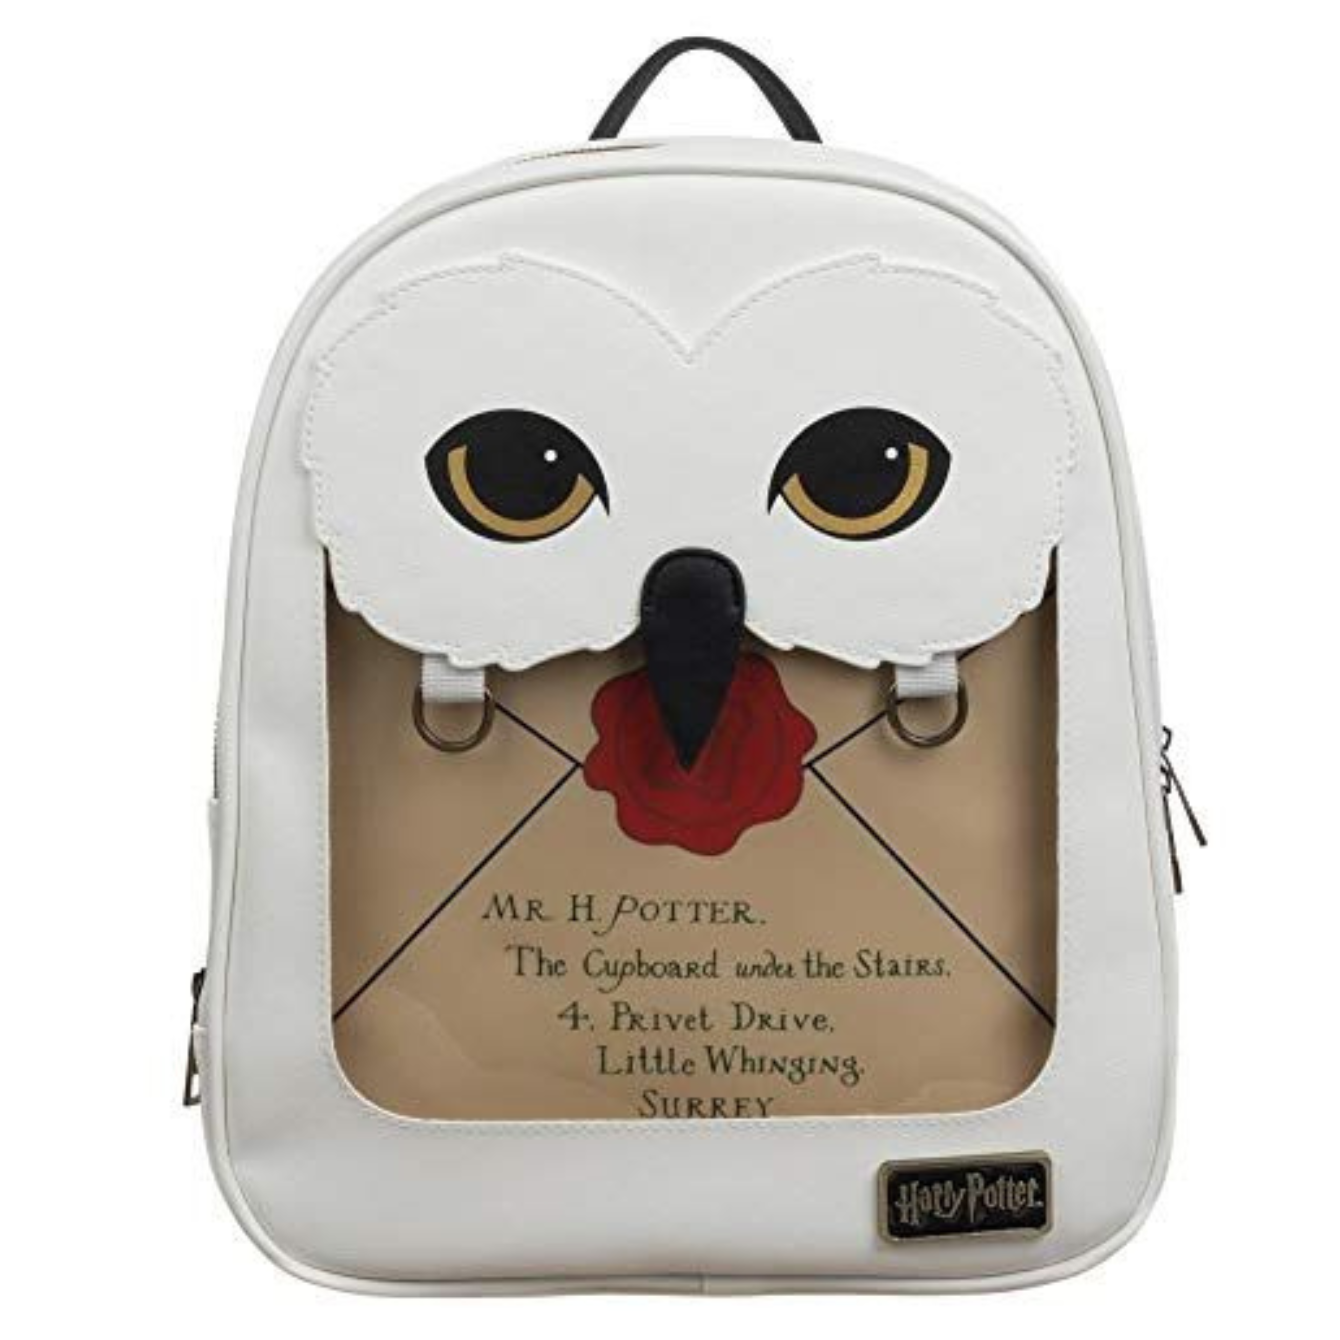 Harry Potter Hedwig Mini Backpack Pin Bag by Bioworld